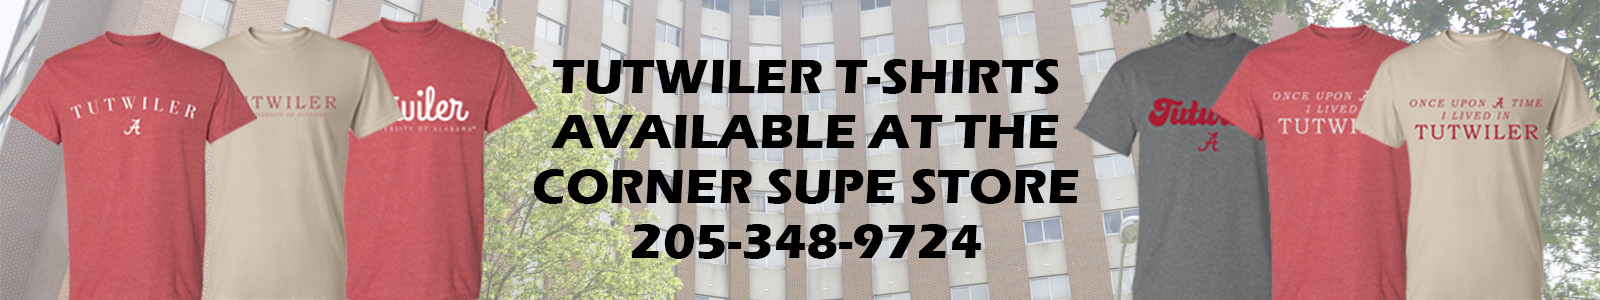 Tutwiler t-shirts available at the Corner Supe Store.  Call 205-348-9724 to place your order